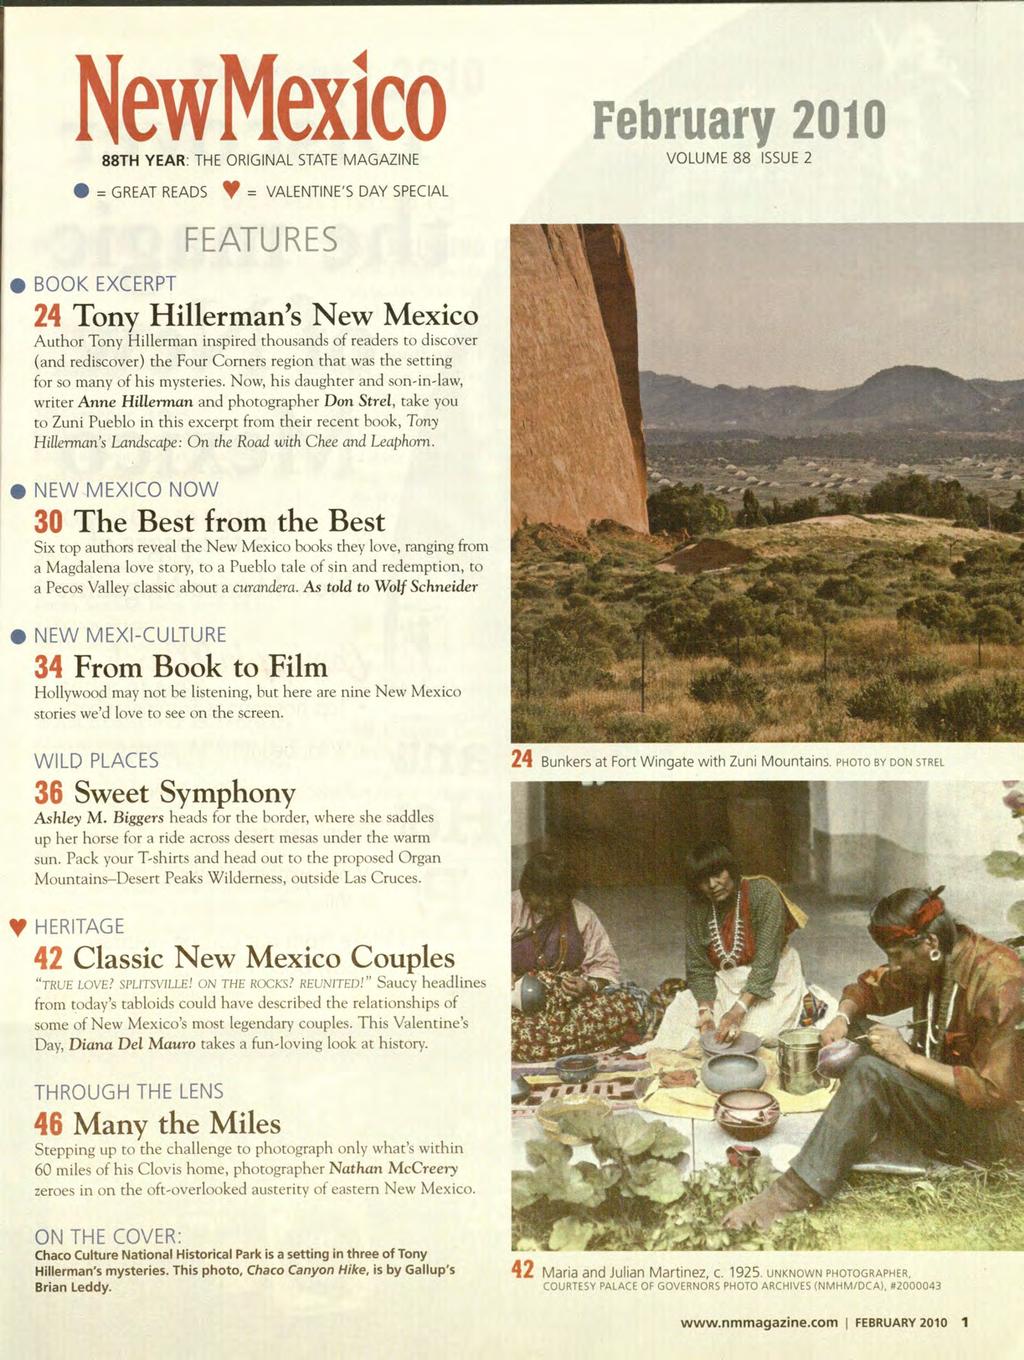 NewMexico 88TH YEAR: THE ORIGINAL STATE MAGAZINE ~ GREAT READS ~ VALENTINE'S DAY SPECIAL February 2010 VOLUME 88 ISSUE 2 FEATURES BOOK EXCERPT 24 Tony Hillerman's New Mexico Author Tony Hillerman